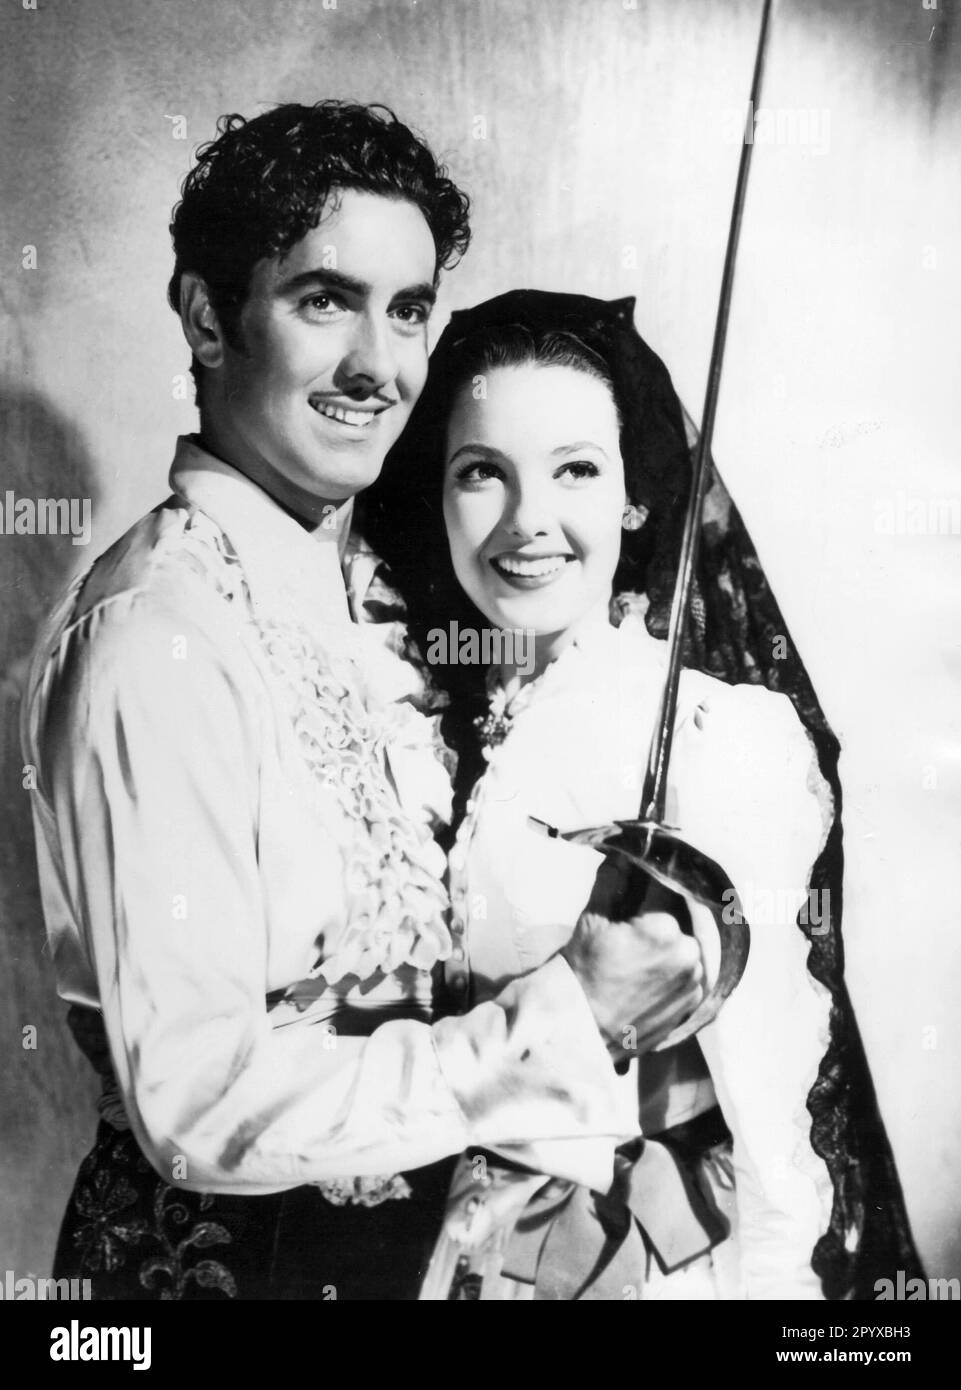 Tyrone Power as Don Diego with saber and Linda Darnell as Lolita in the movie 'Under the Sign of Zorro' . [automated translation] Stock Photo